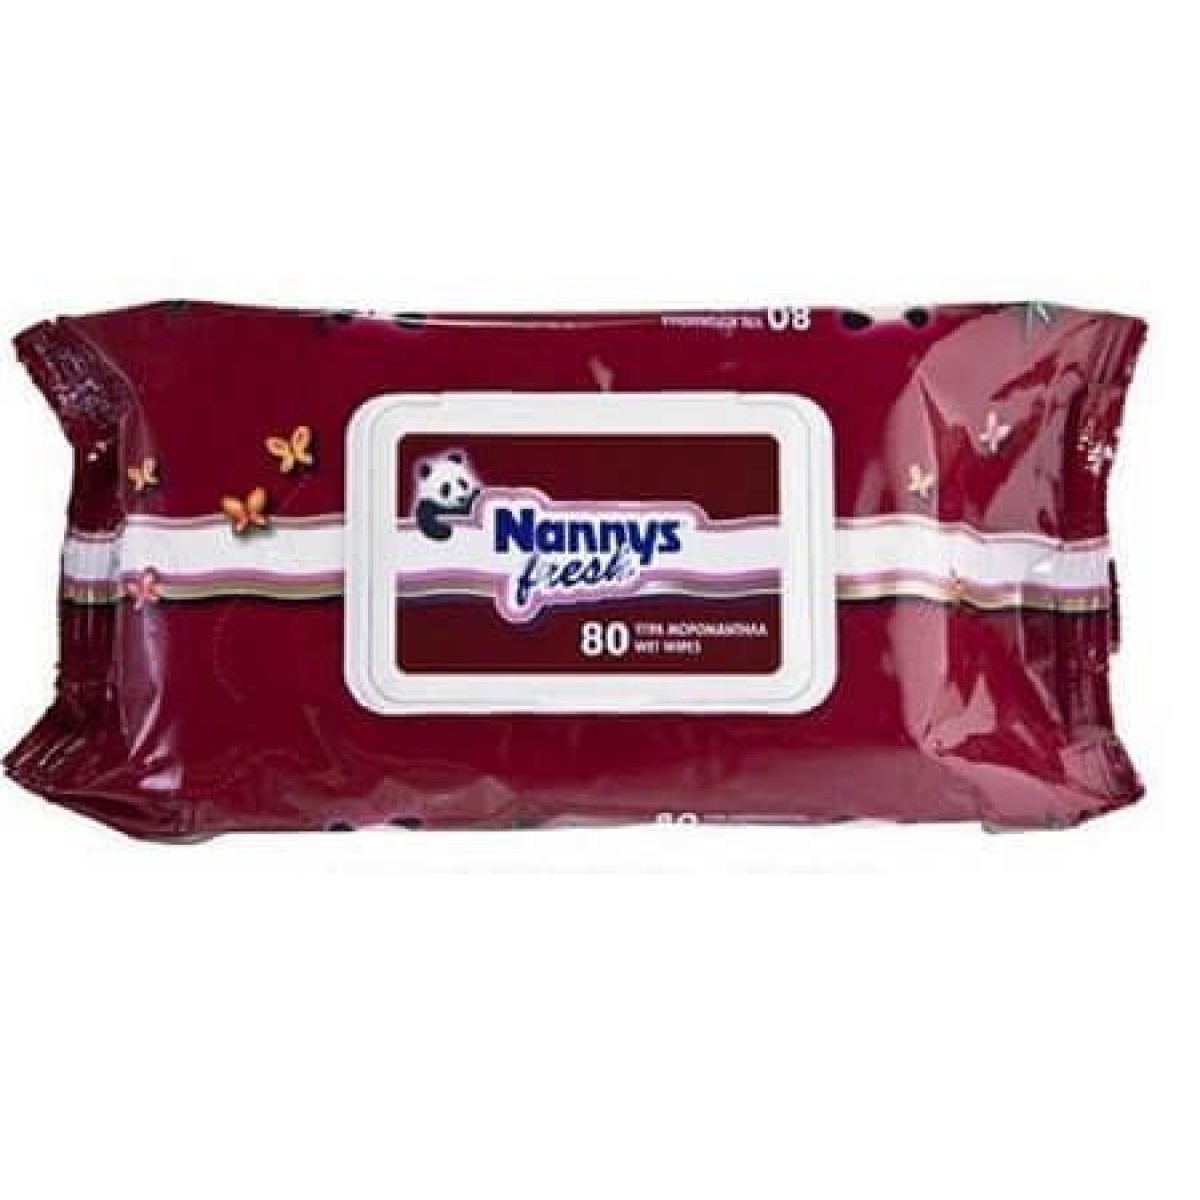 Nannys | Baby\'s Wish Wet Wipes | Μωρομάντηλα με Καπάκι | 80τμχ